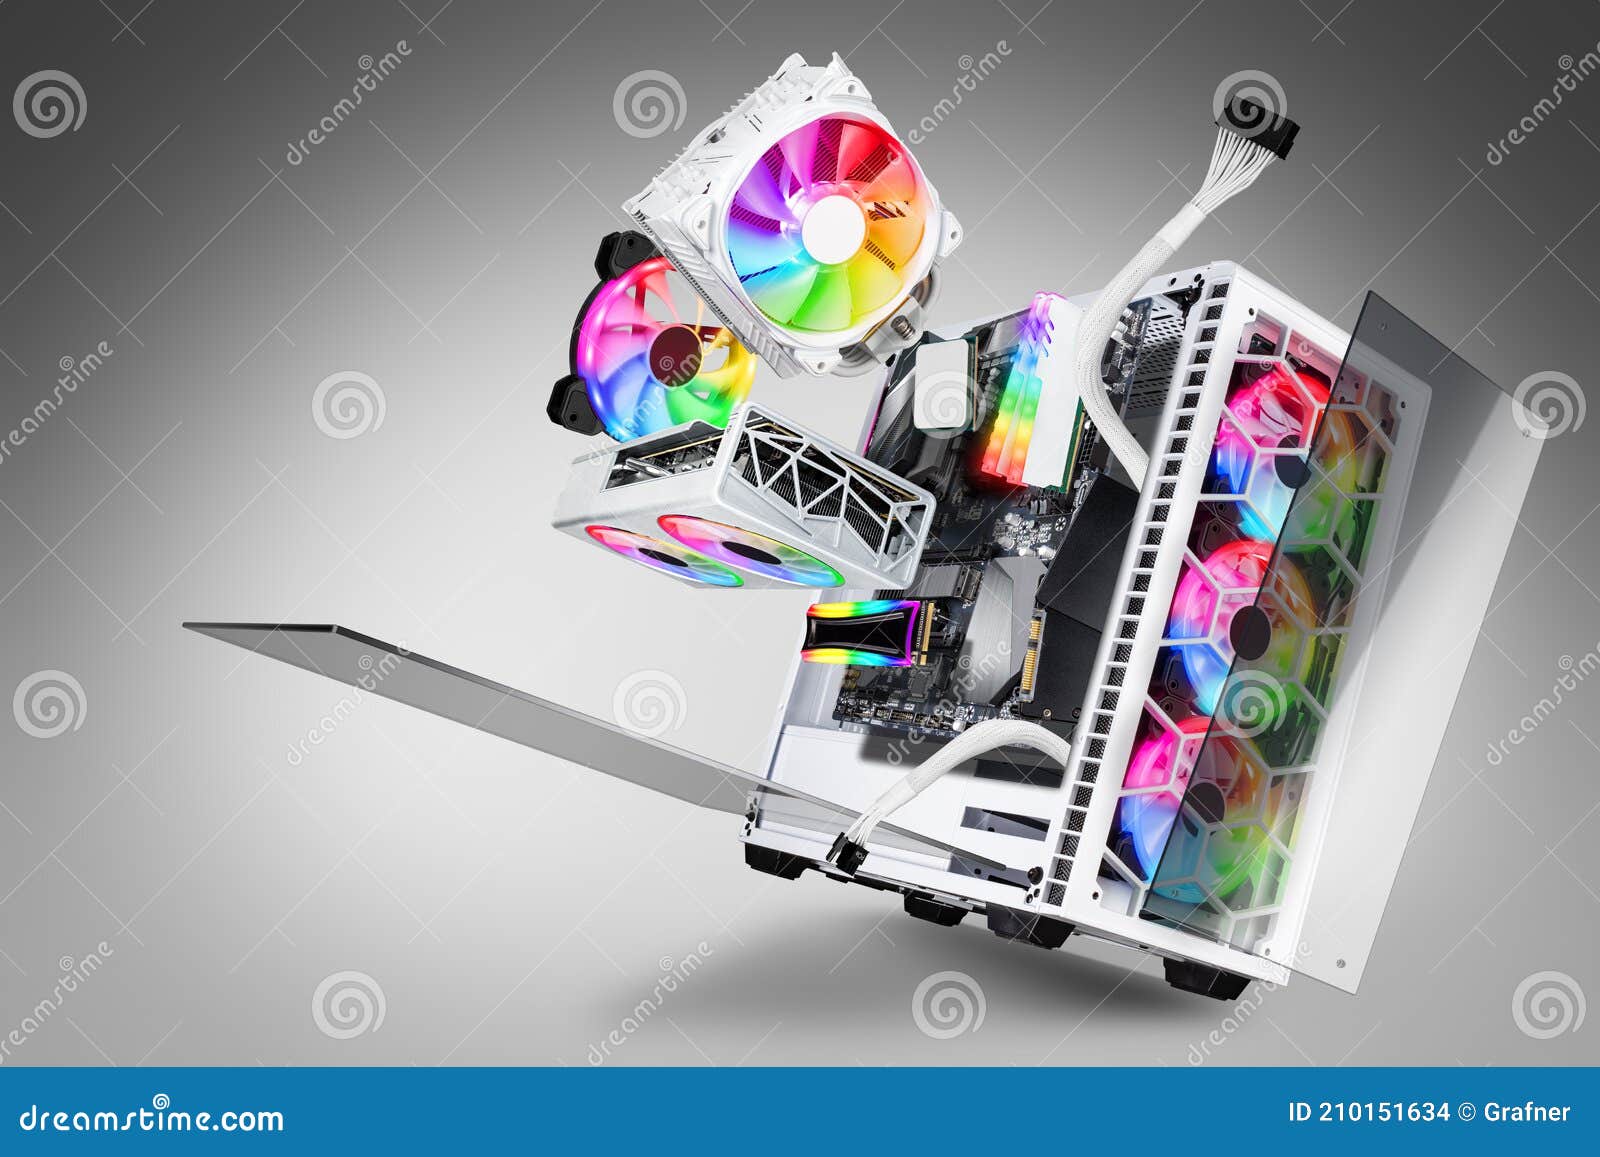 exploded view of white gaming pc computer with glass windows and rainbow rgb led lights. flying hardware components abstract